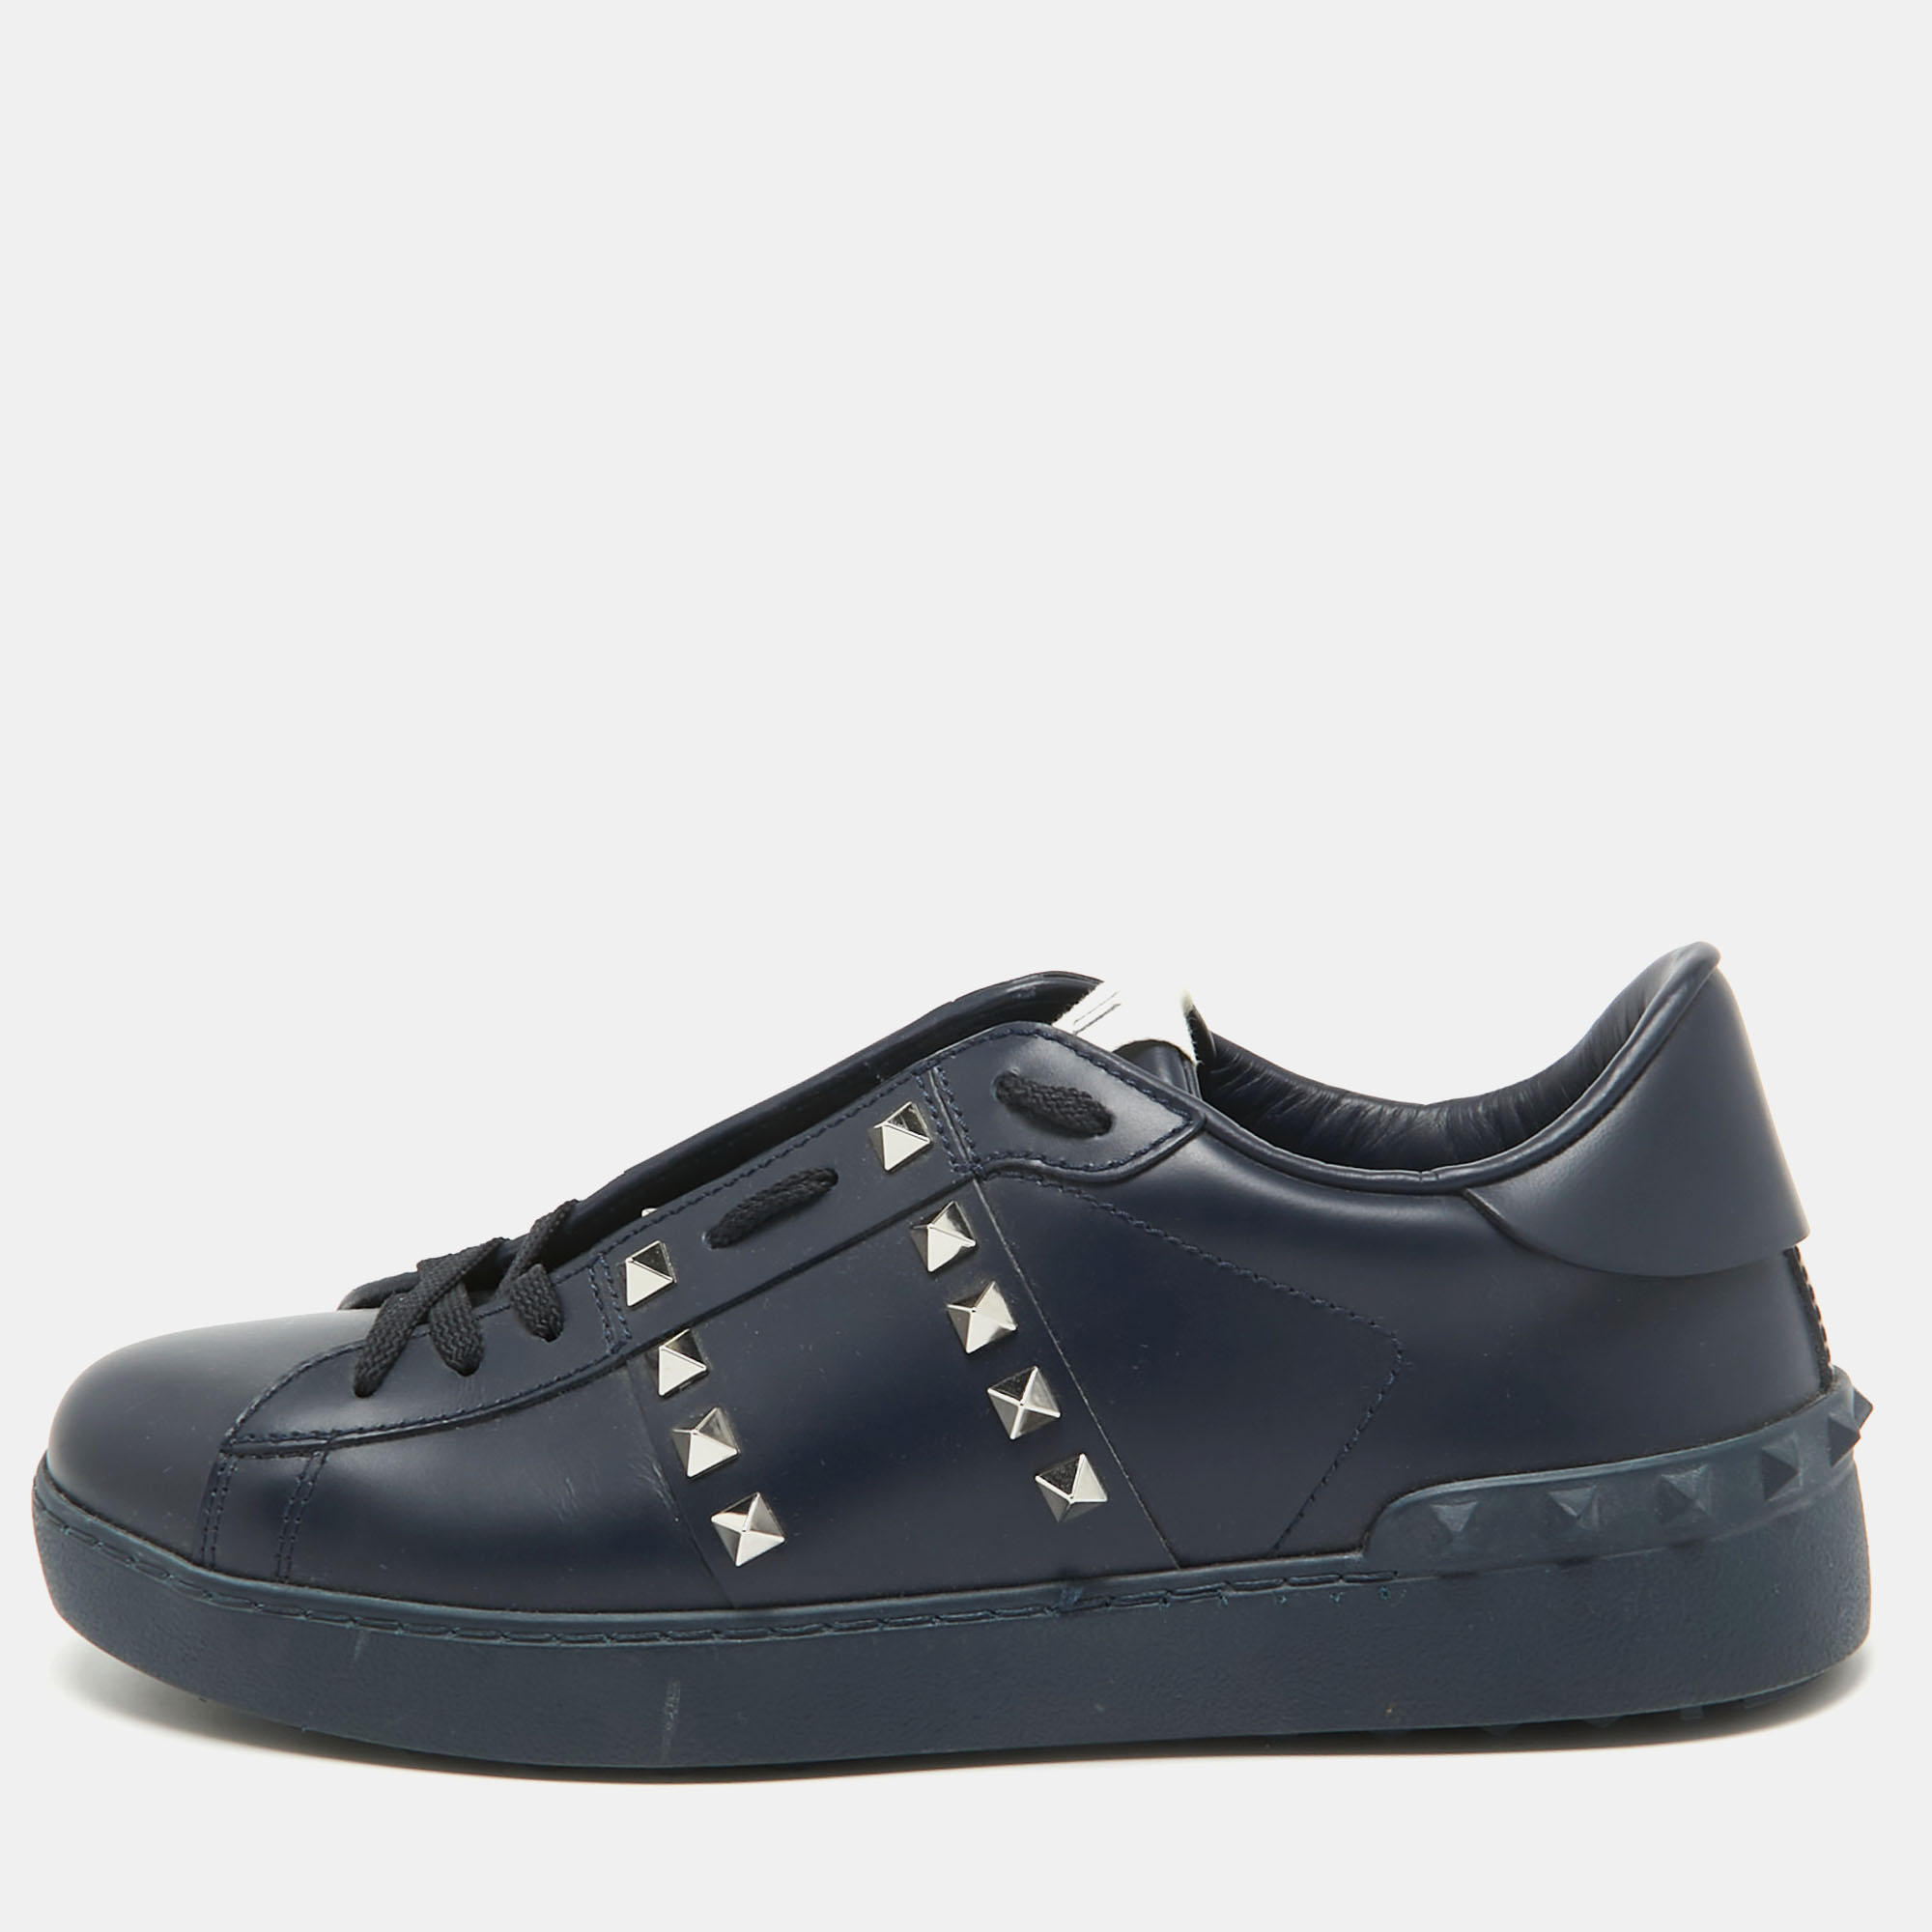 Valentino navy blue leather rockstud low top sneakers size 39